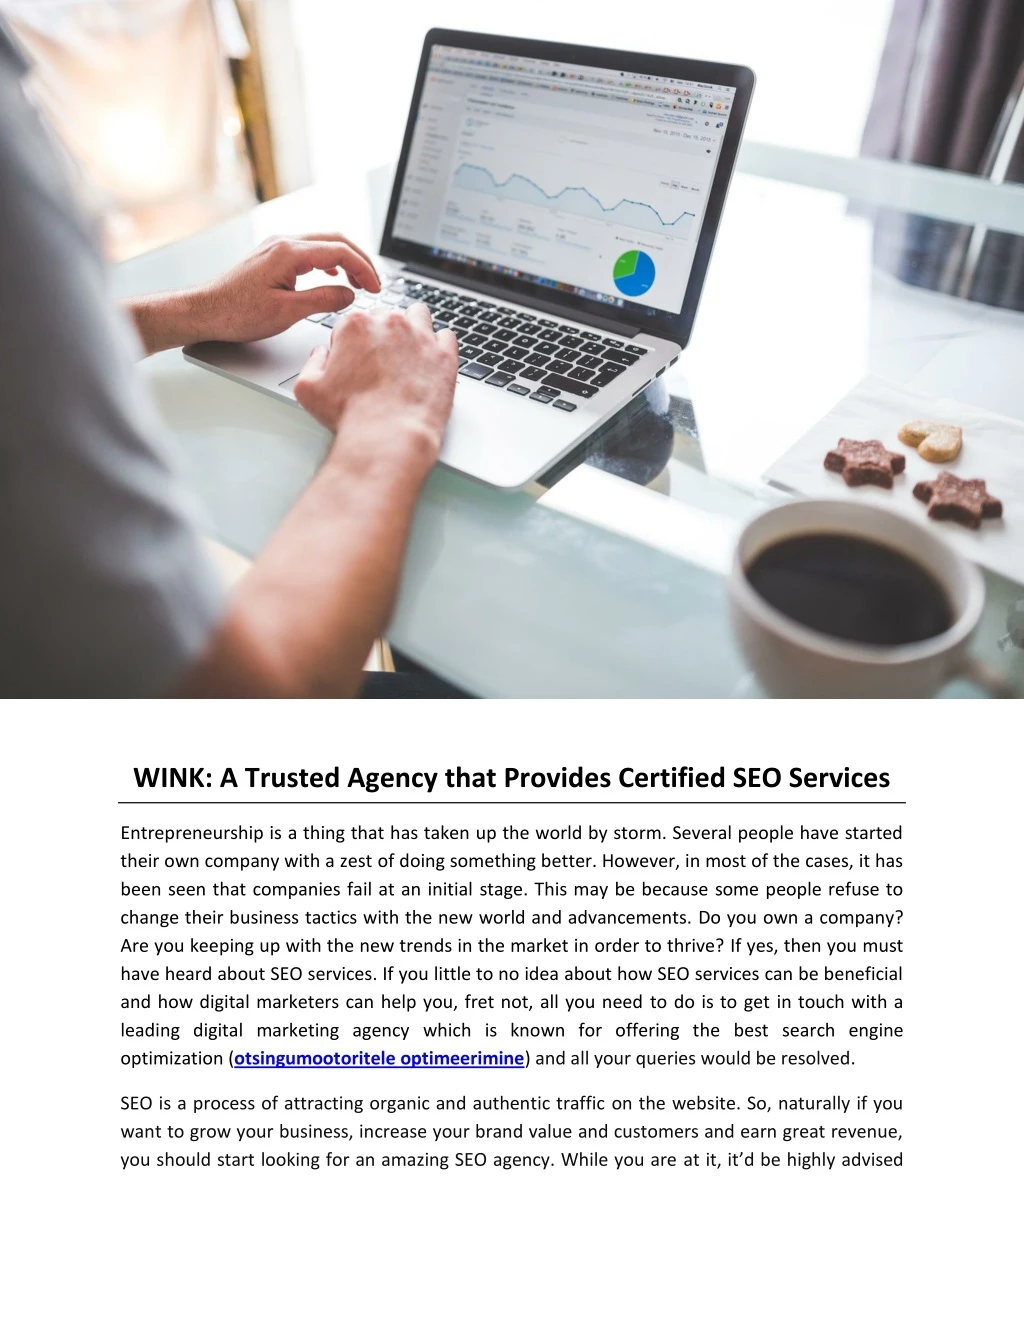 wink a trusted agency that provides certified